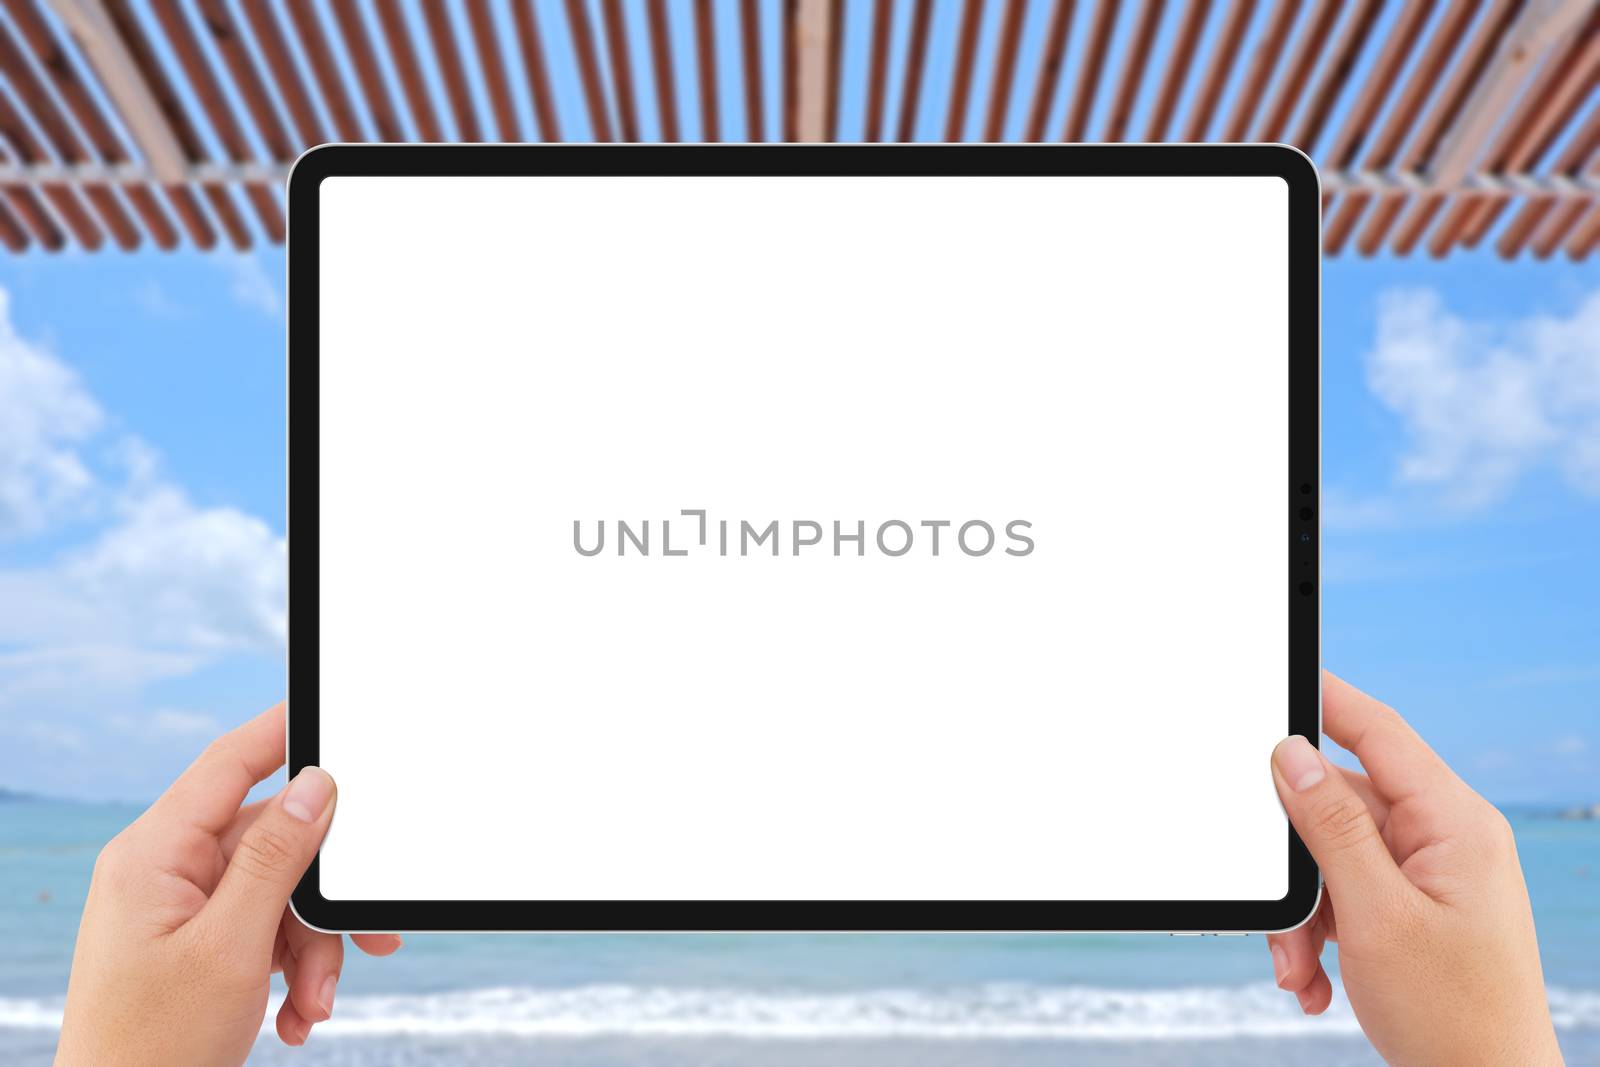 The human two hands holding white tablet computer white screen mockup near beach